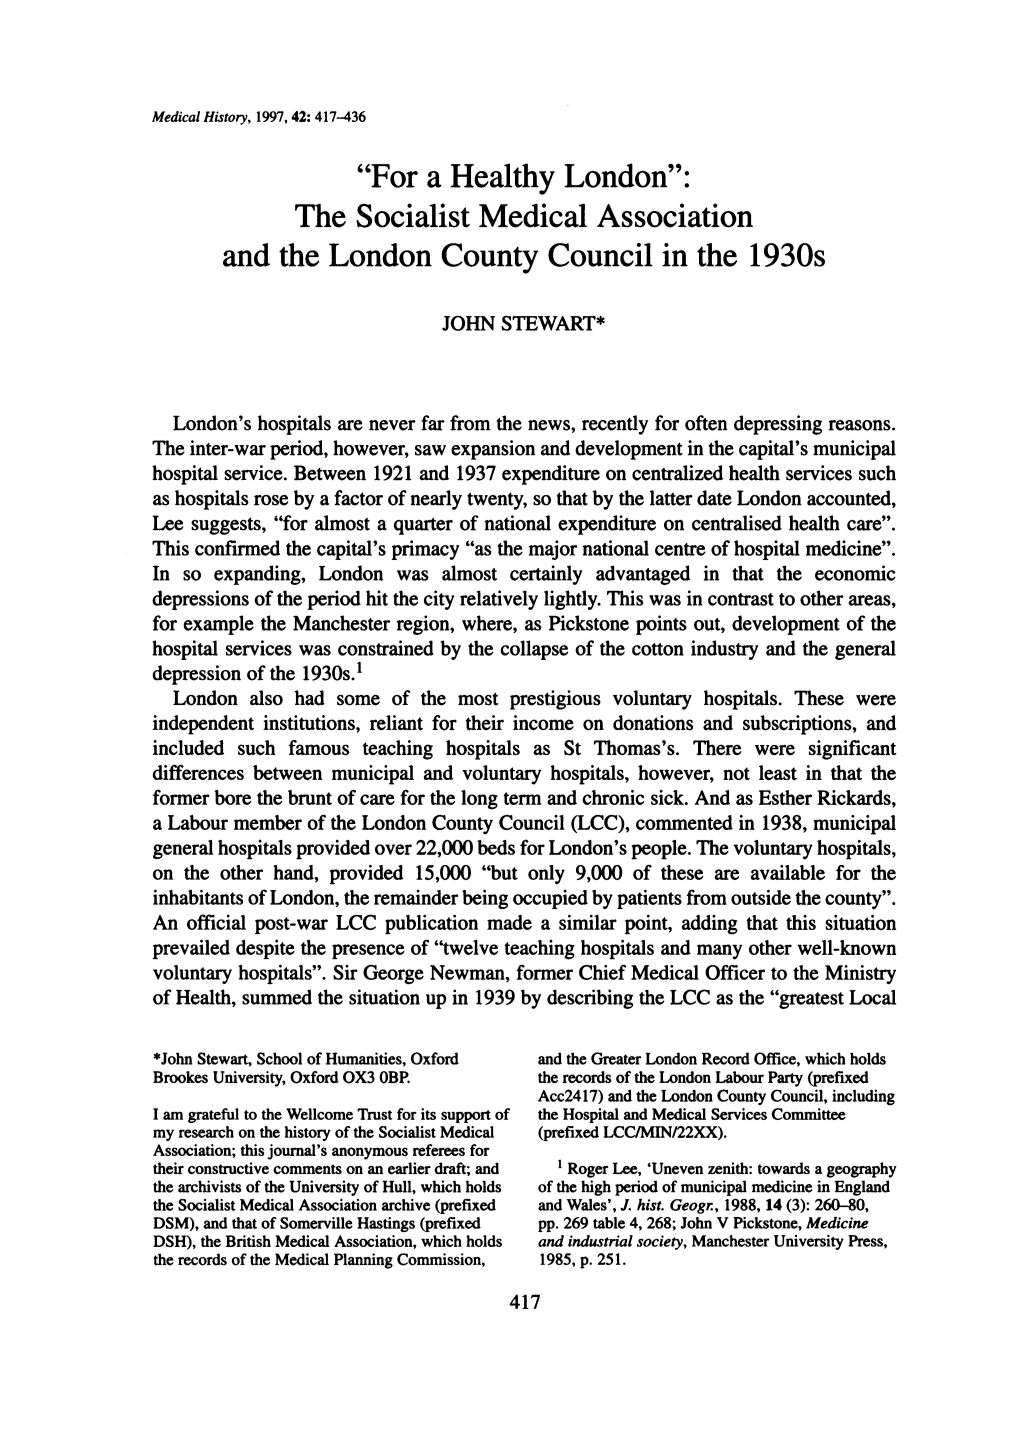 The Socialist Medical Association and the London County Council in the 1930S